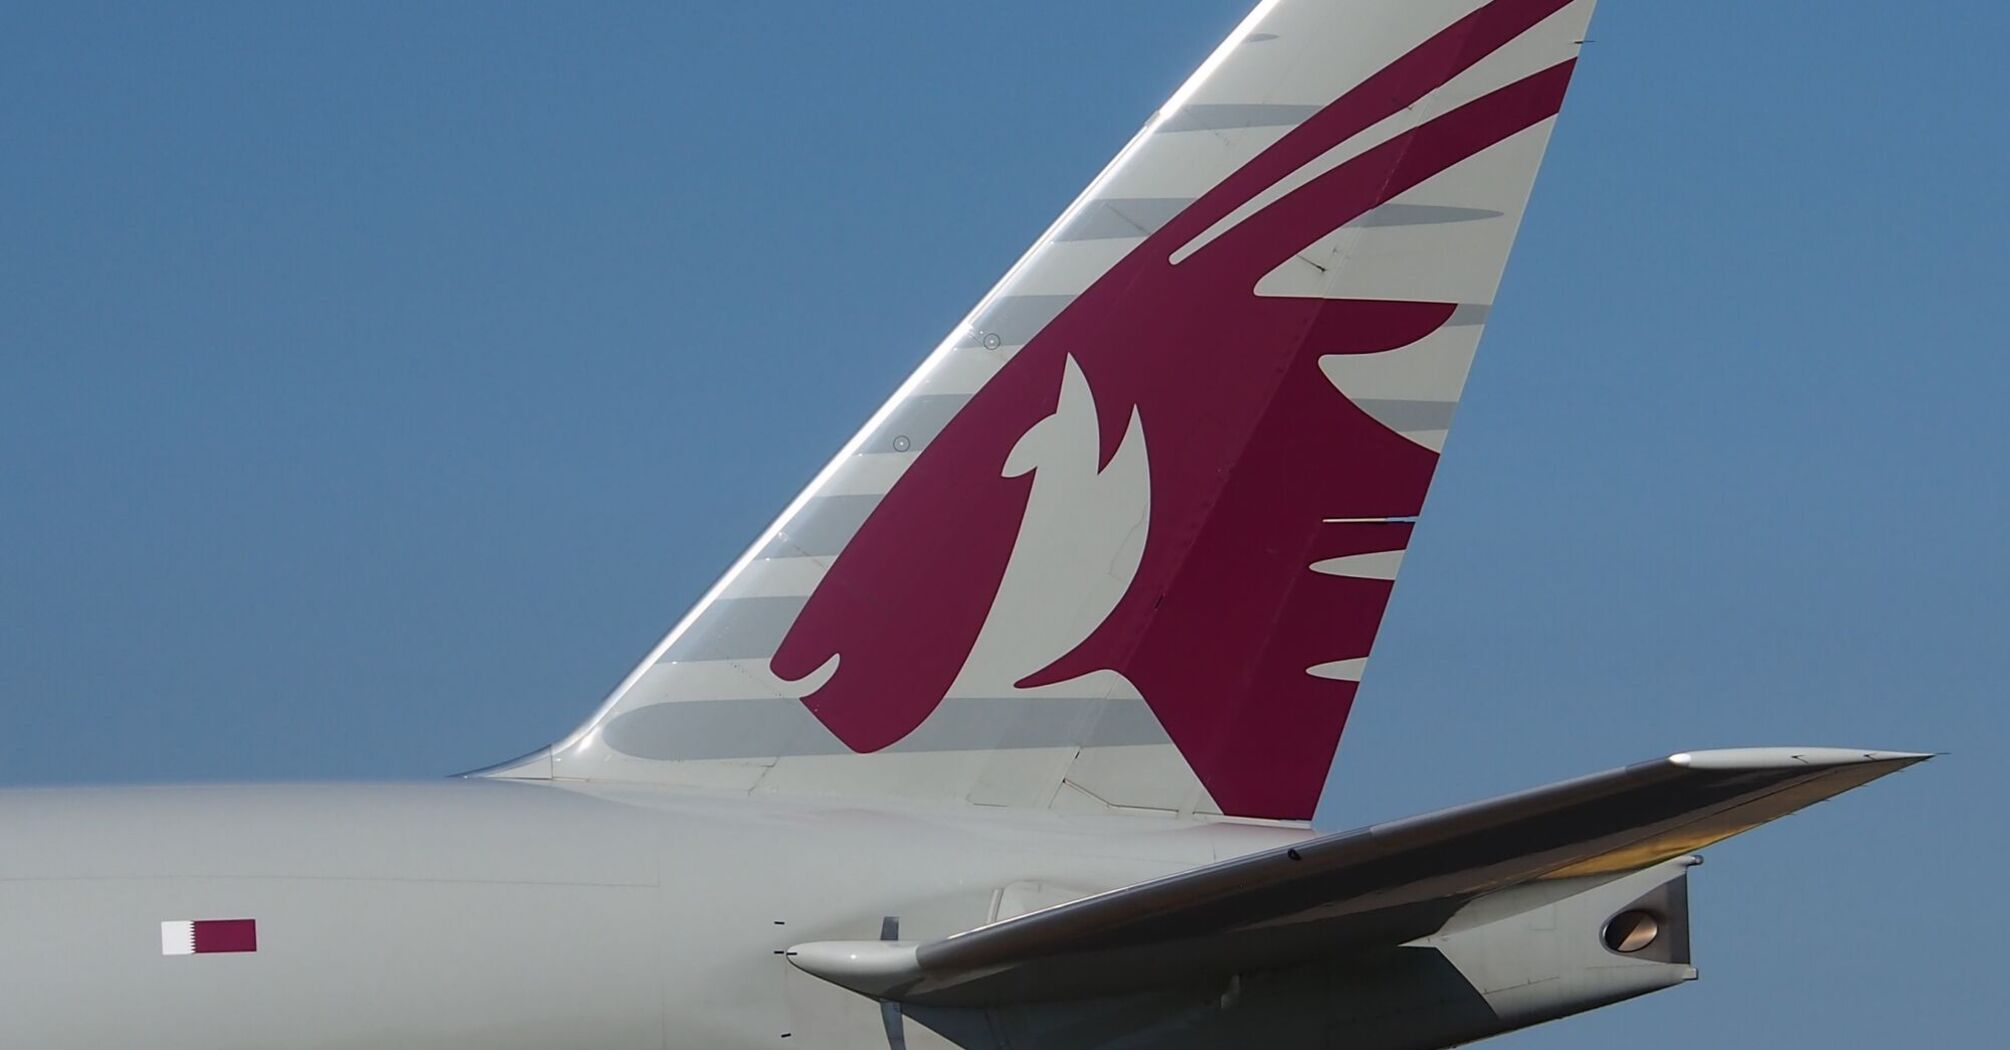 The tail fin of a Qatar Airways aircraft showing the airline's distinctive oryx logo against a clear blue sky 